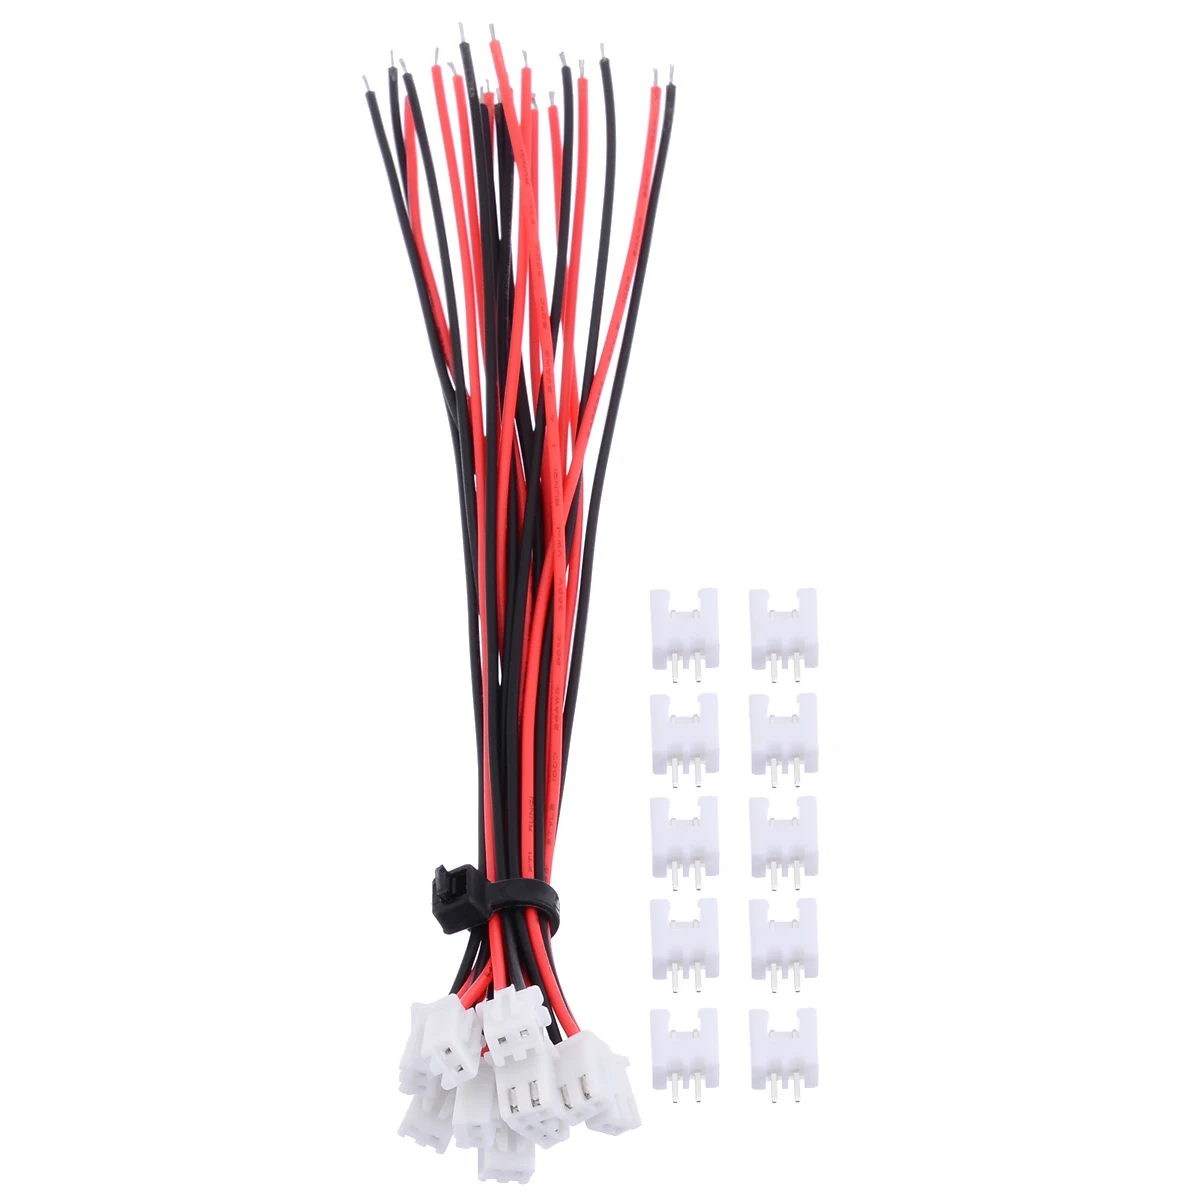 10 Sets 24AWG Mini Micro Connector With Wires JST XH 2.54mm 2 Pin Connector Plug With Wires 150mm Length